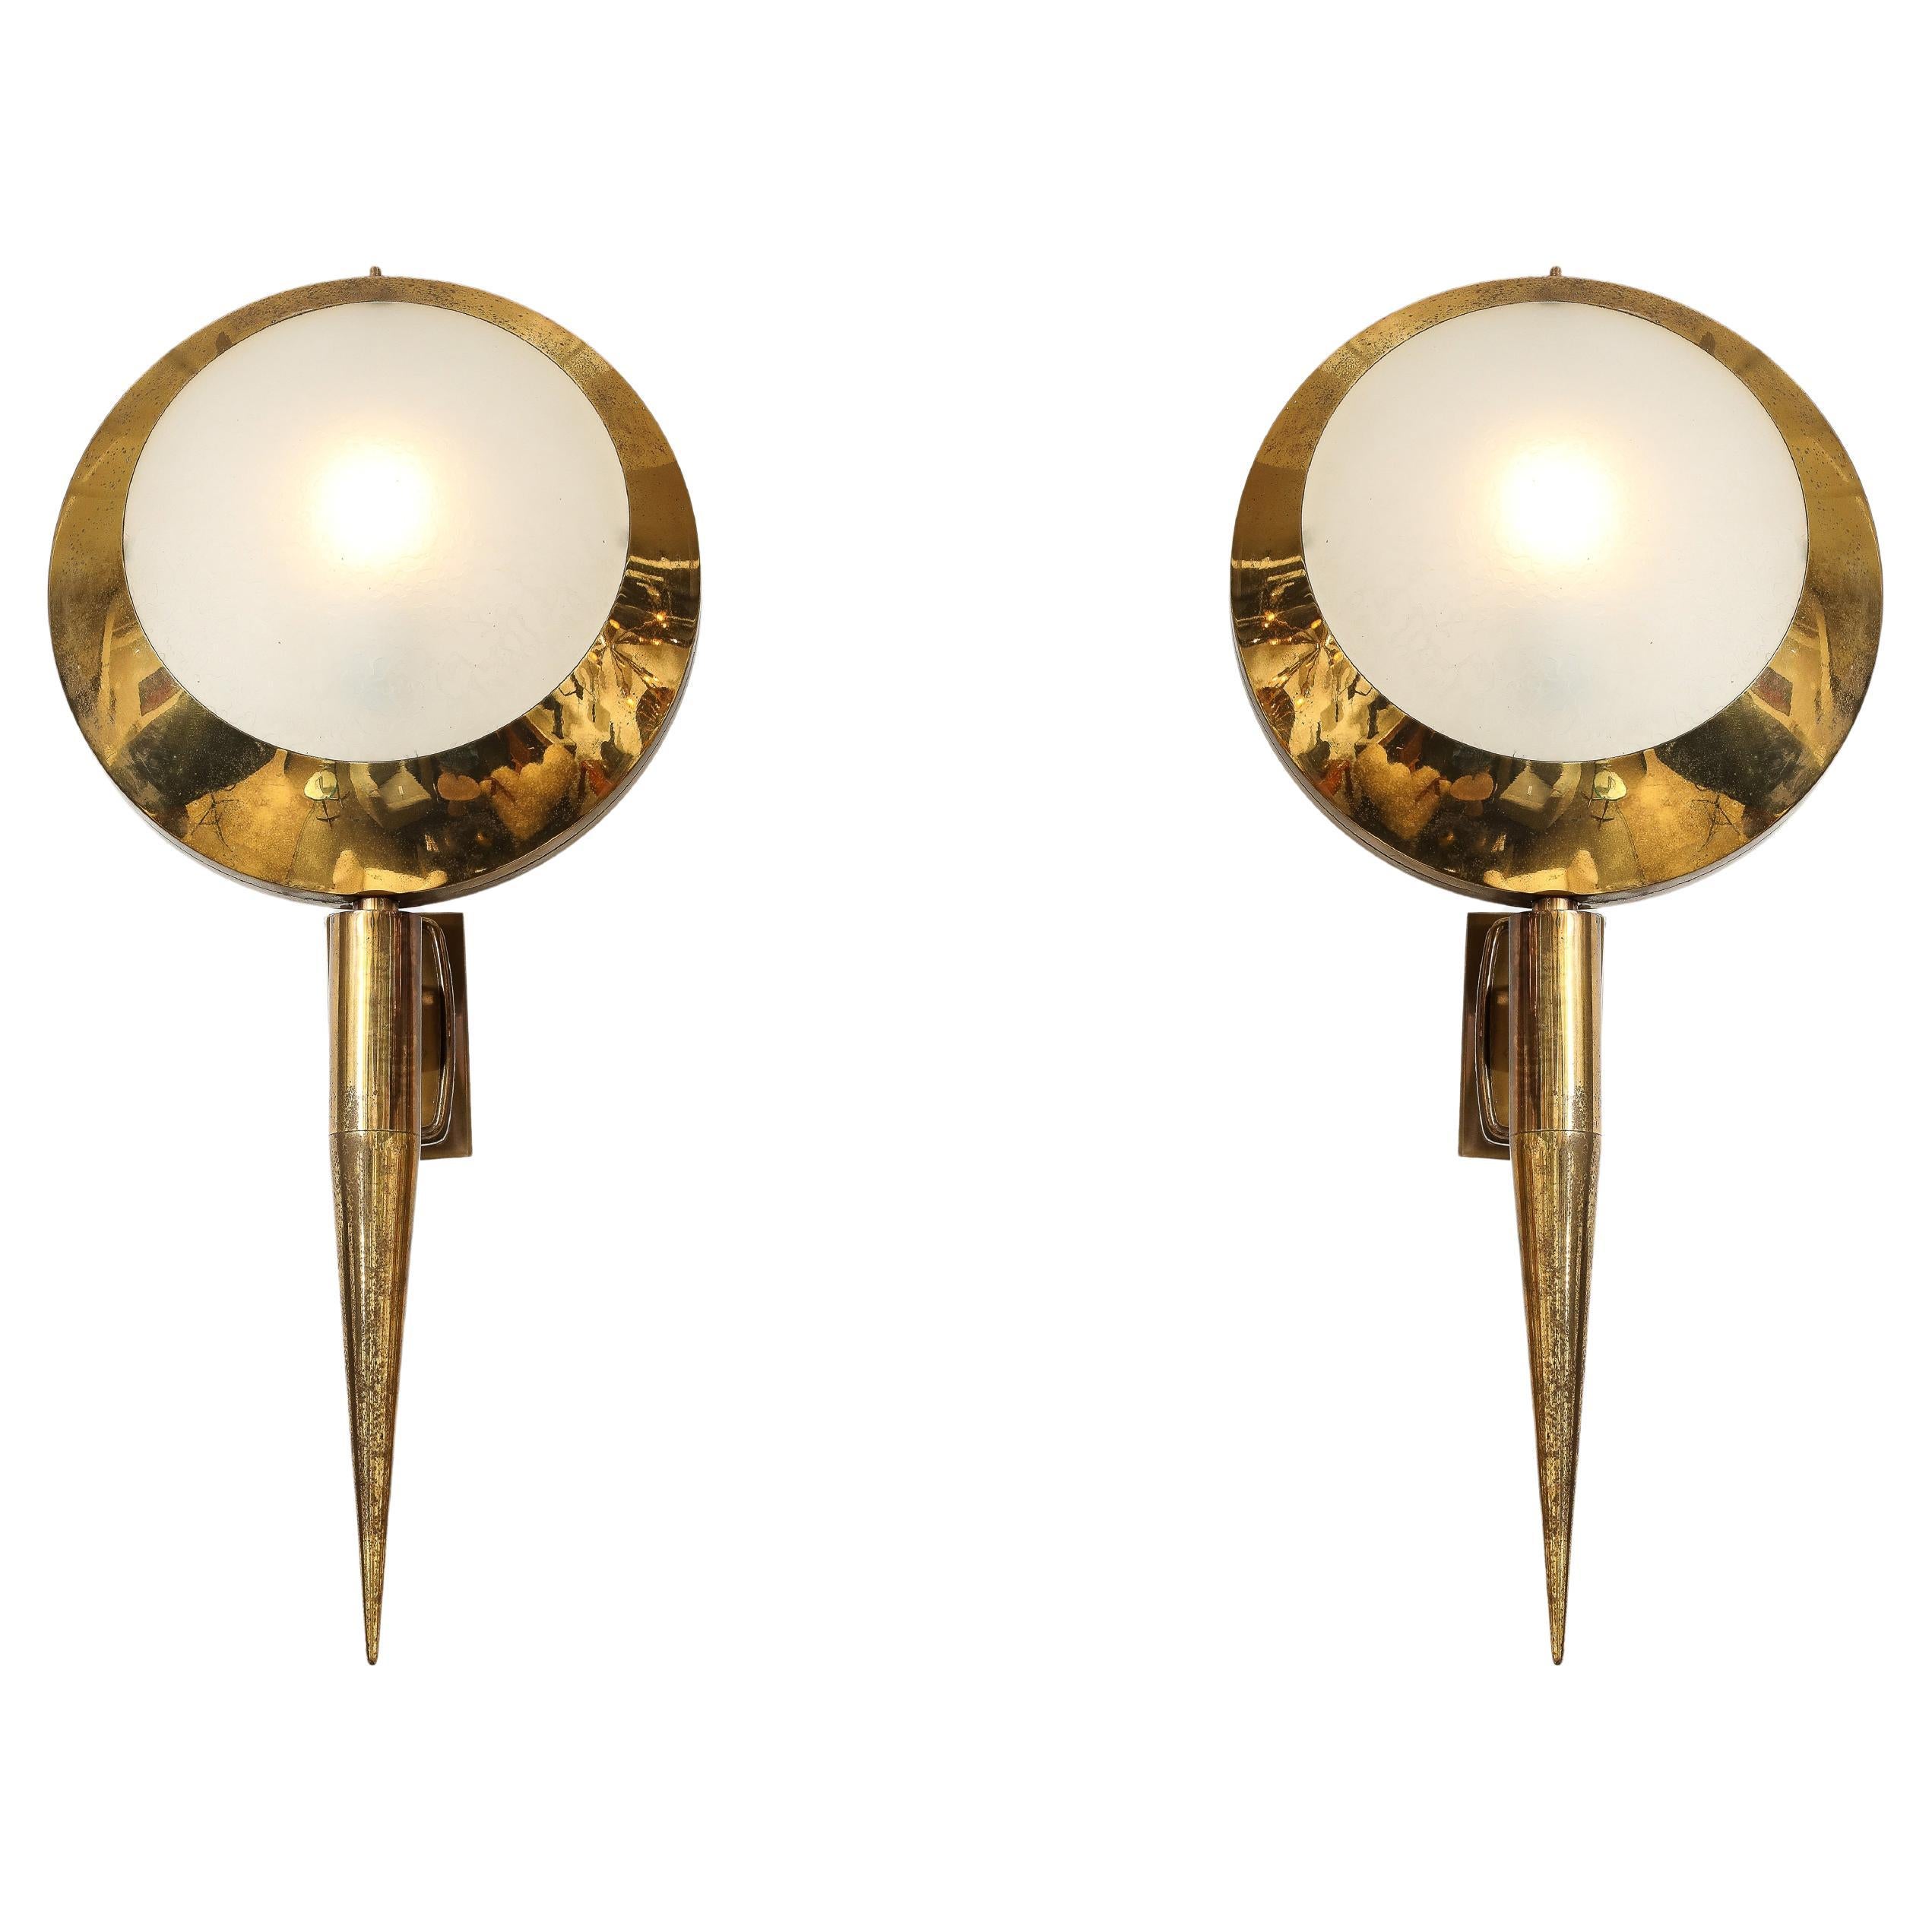 Stilnovo Rare Large Pair of Sconces Model 2128 in Brass and Glass, 1950s For Sale